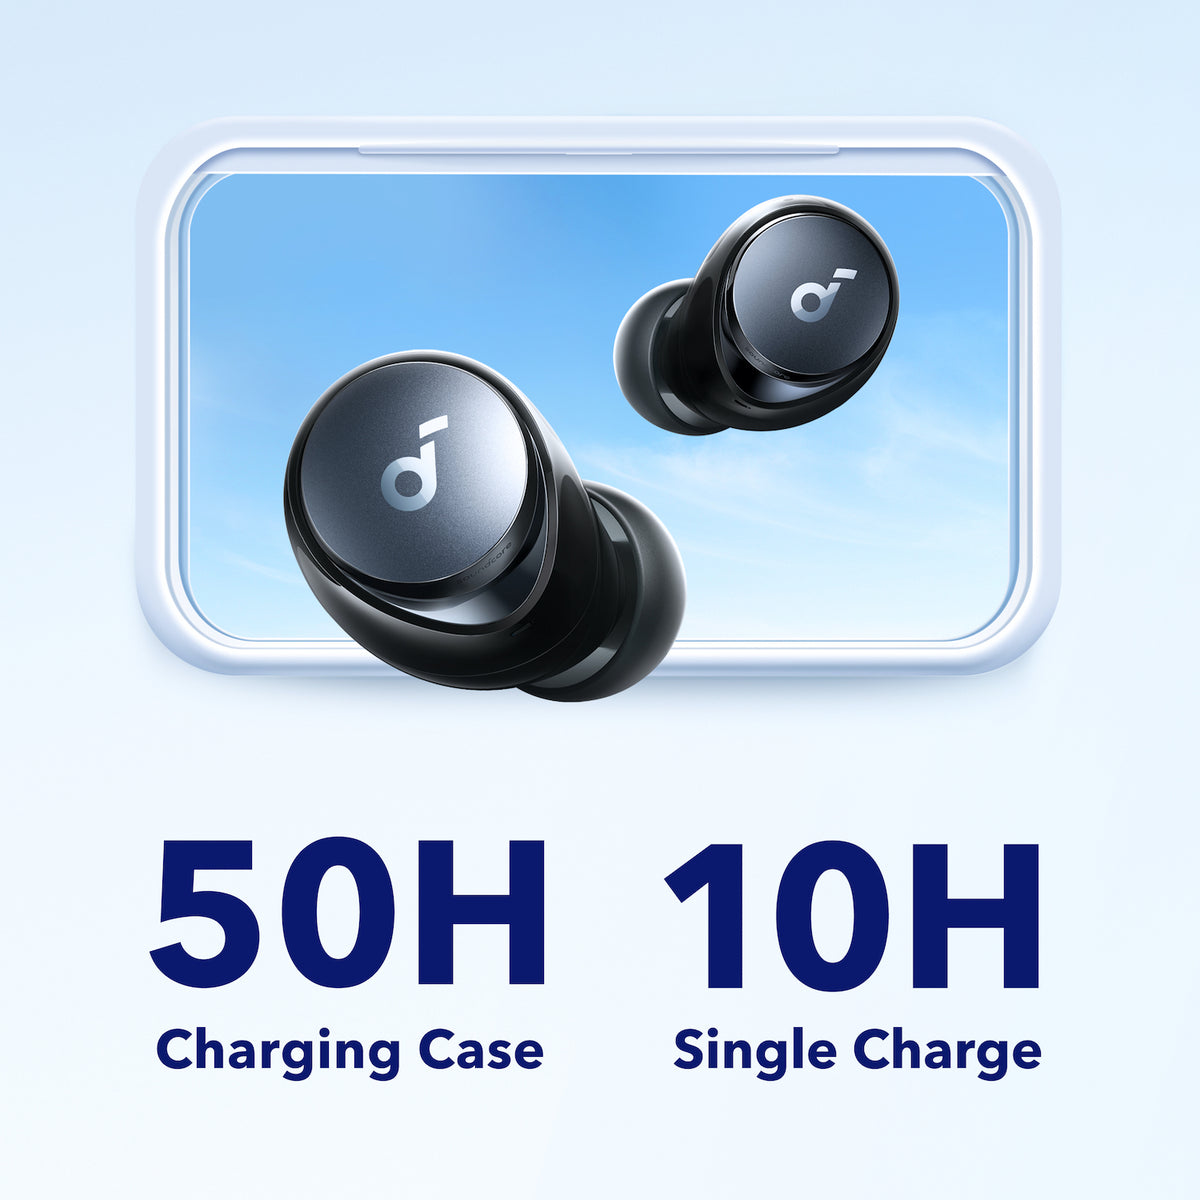 Space A40 | Long-Lasting Noise Cancelling Earbuds